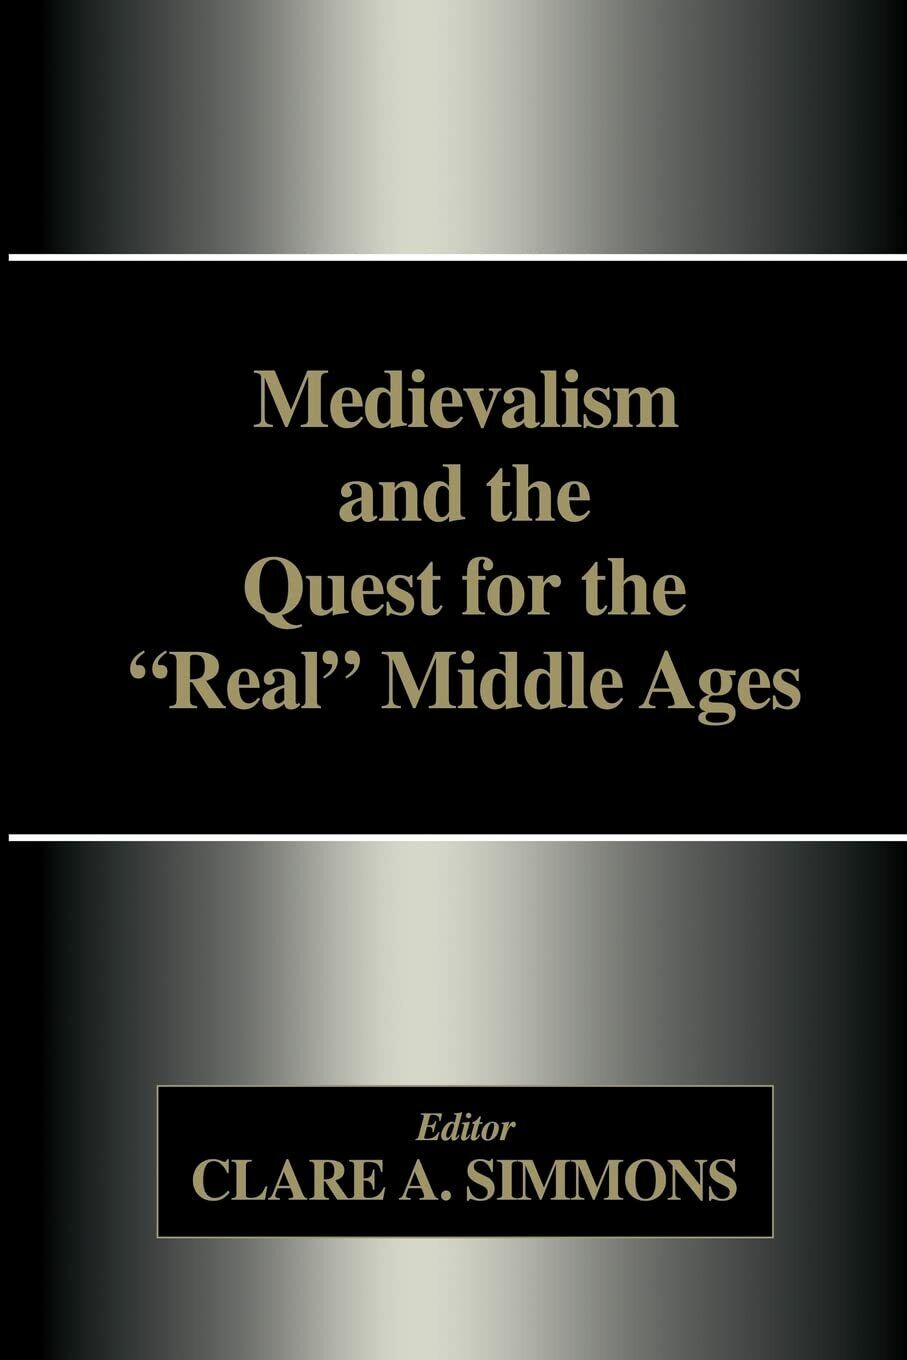 Medievalism and the Quest for the Real Middle Ages - Clare A. Simmons - 2015